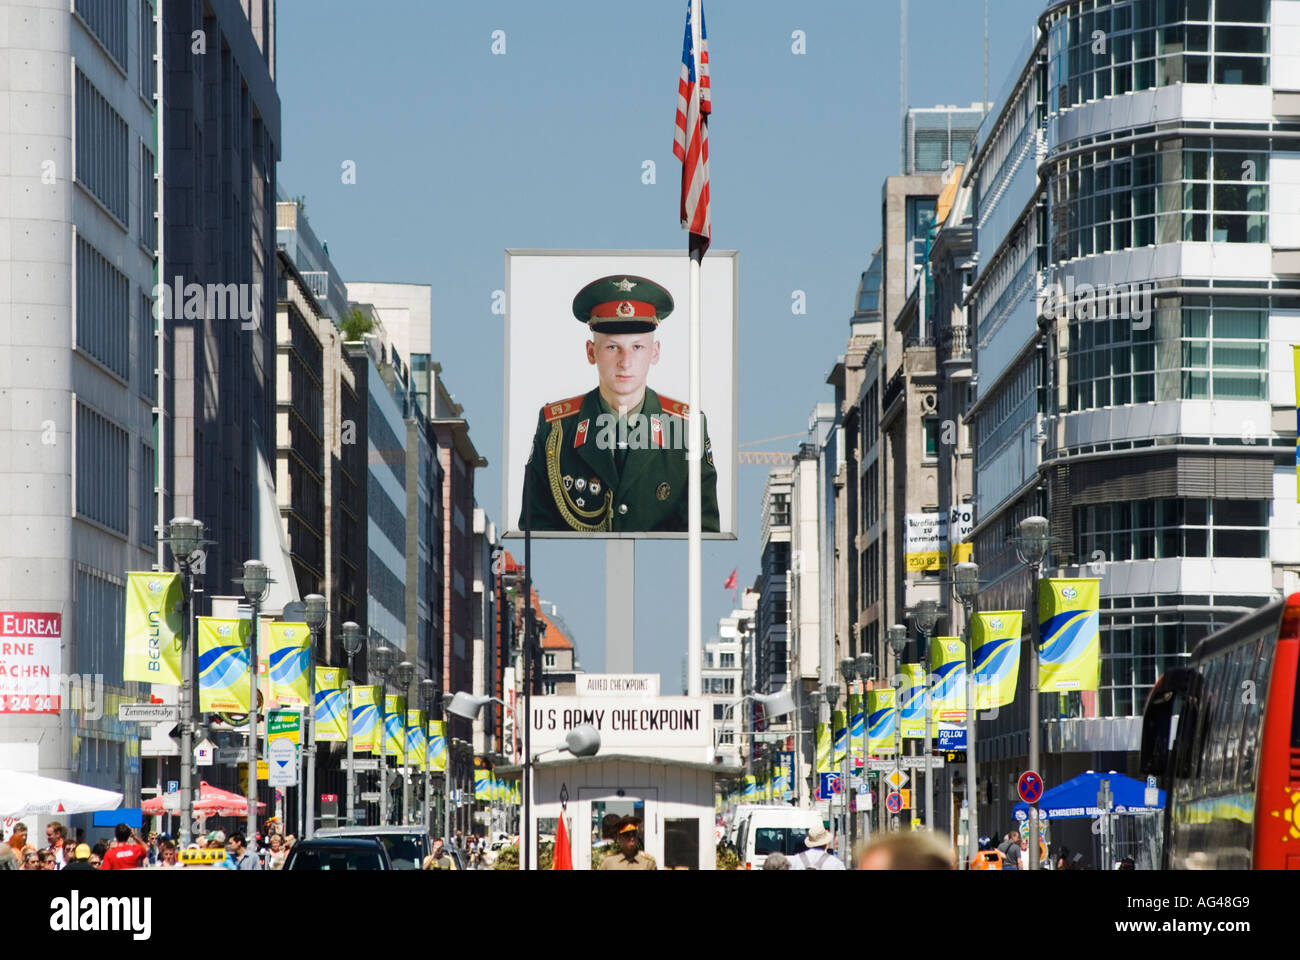 Checkpoint Charlie; Portrait of Soviet soldier at Checkpoint Charlie Berlin Stock Photo